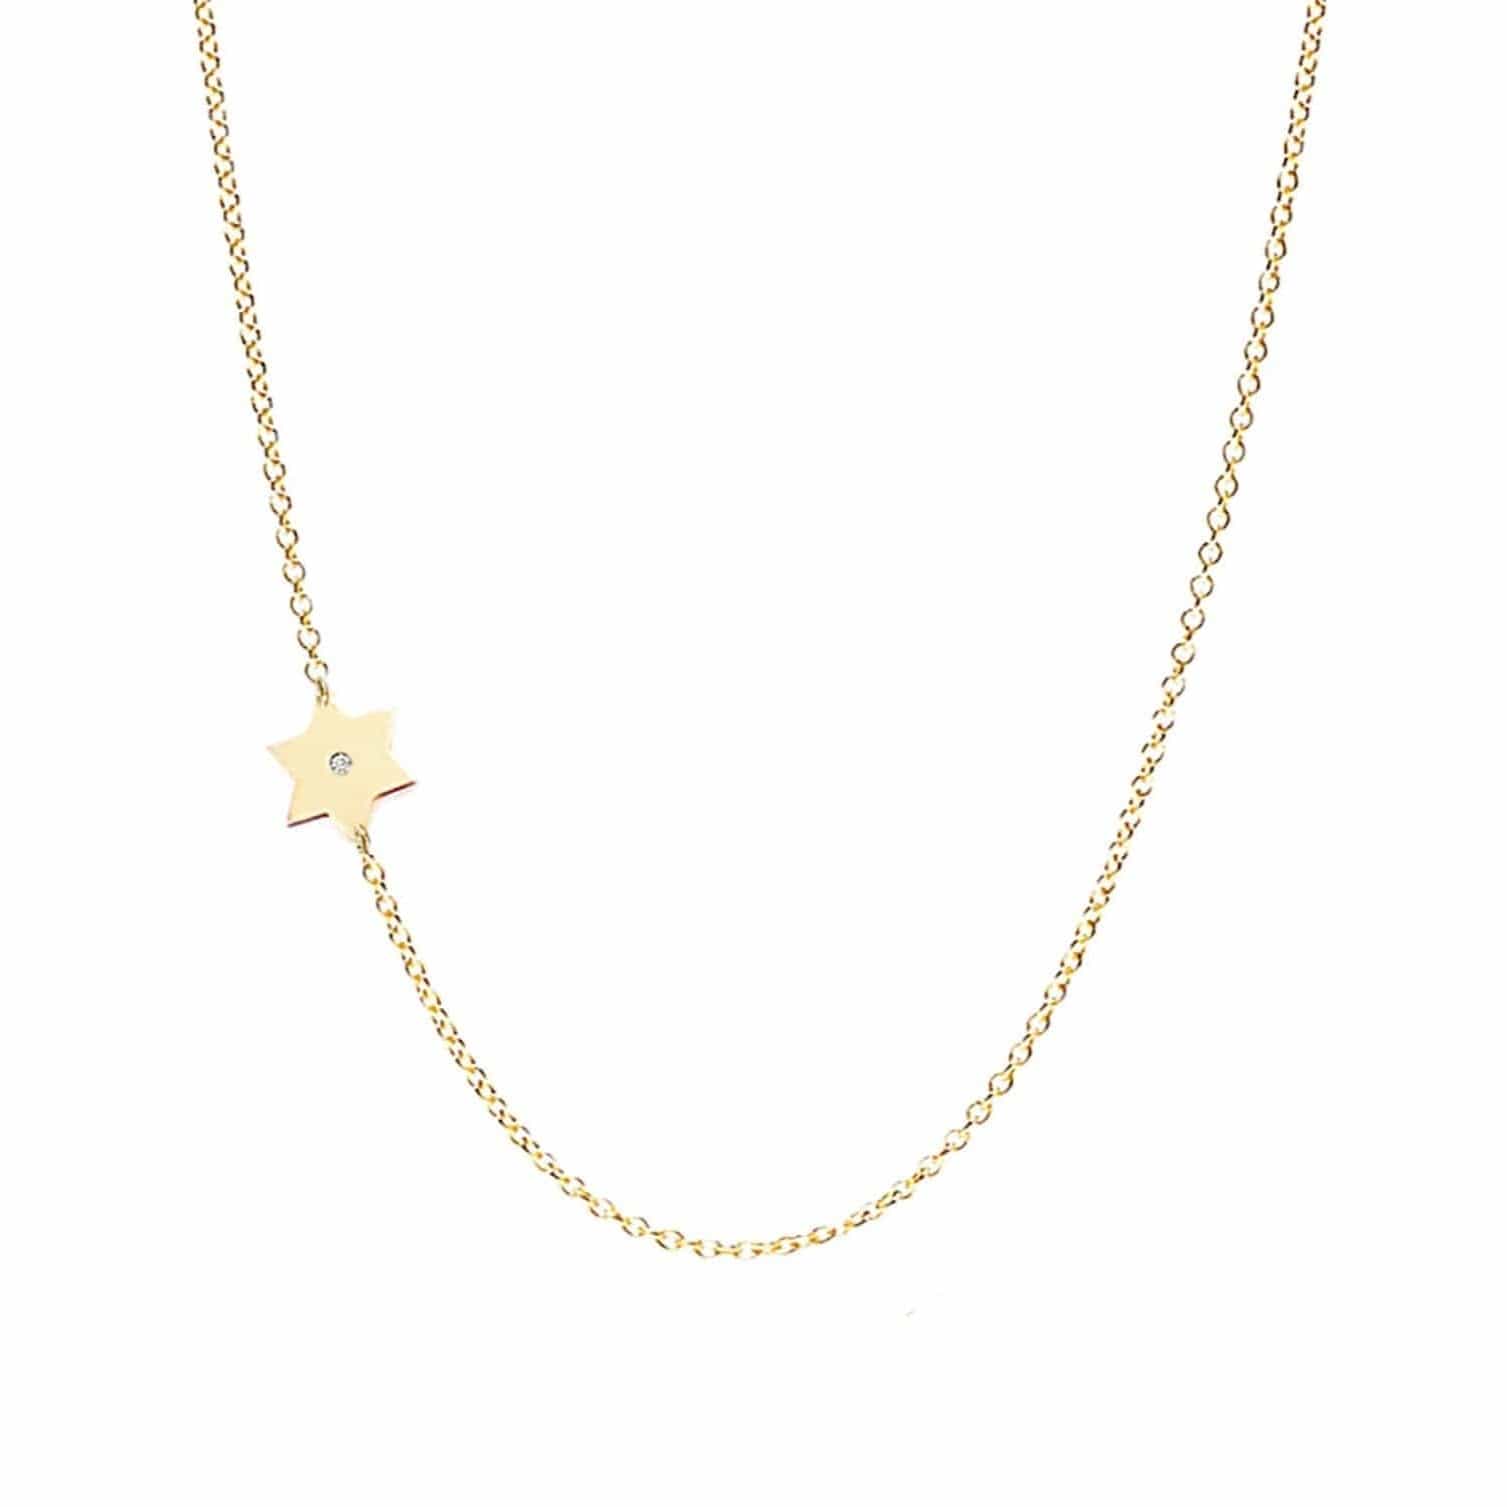 Miriam Merenfeld Jewelry Necklaces Classic Star of David Necklace - Gold Plated